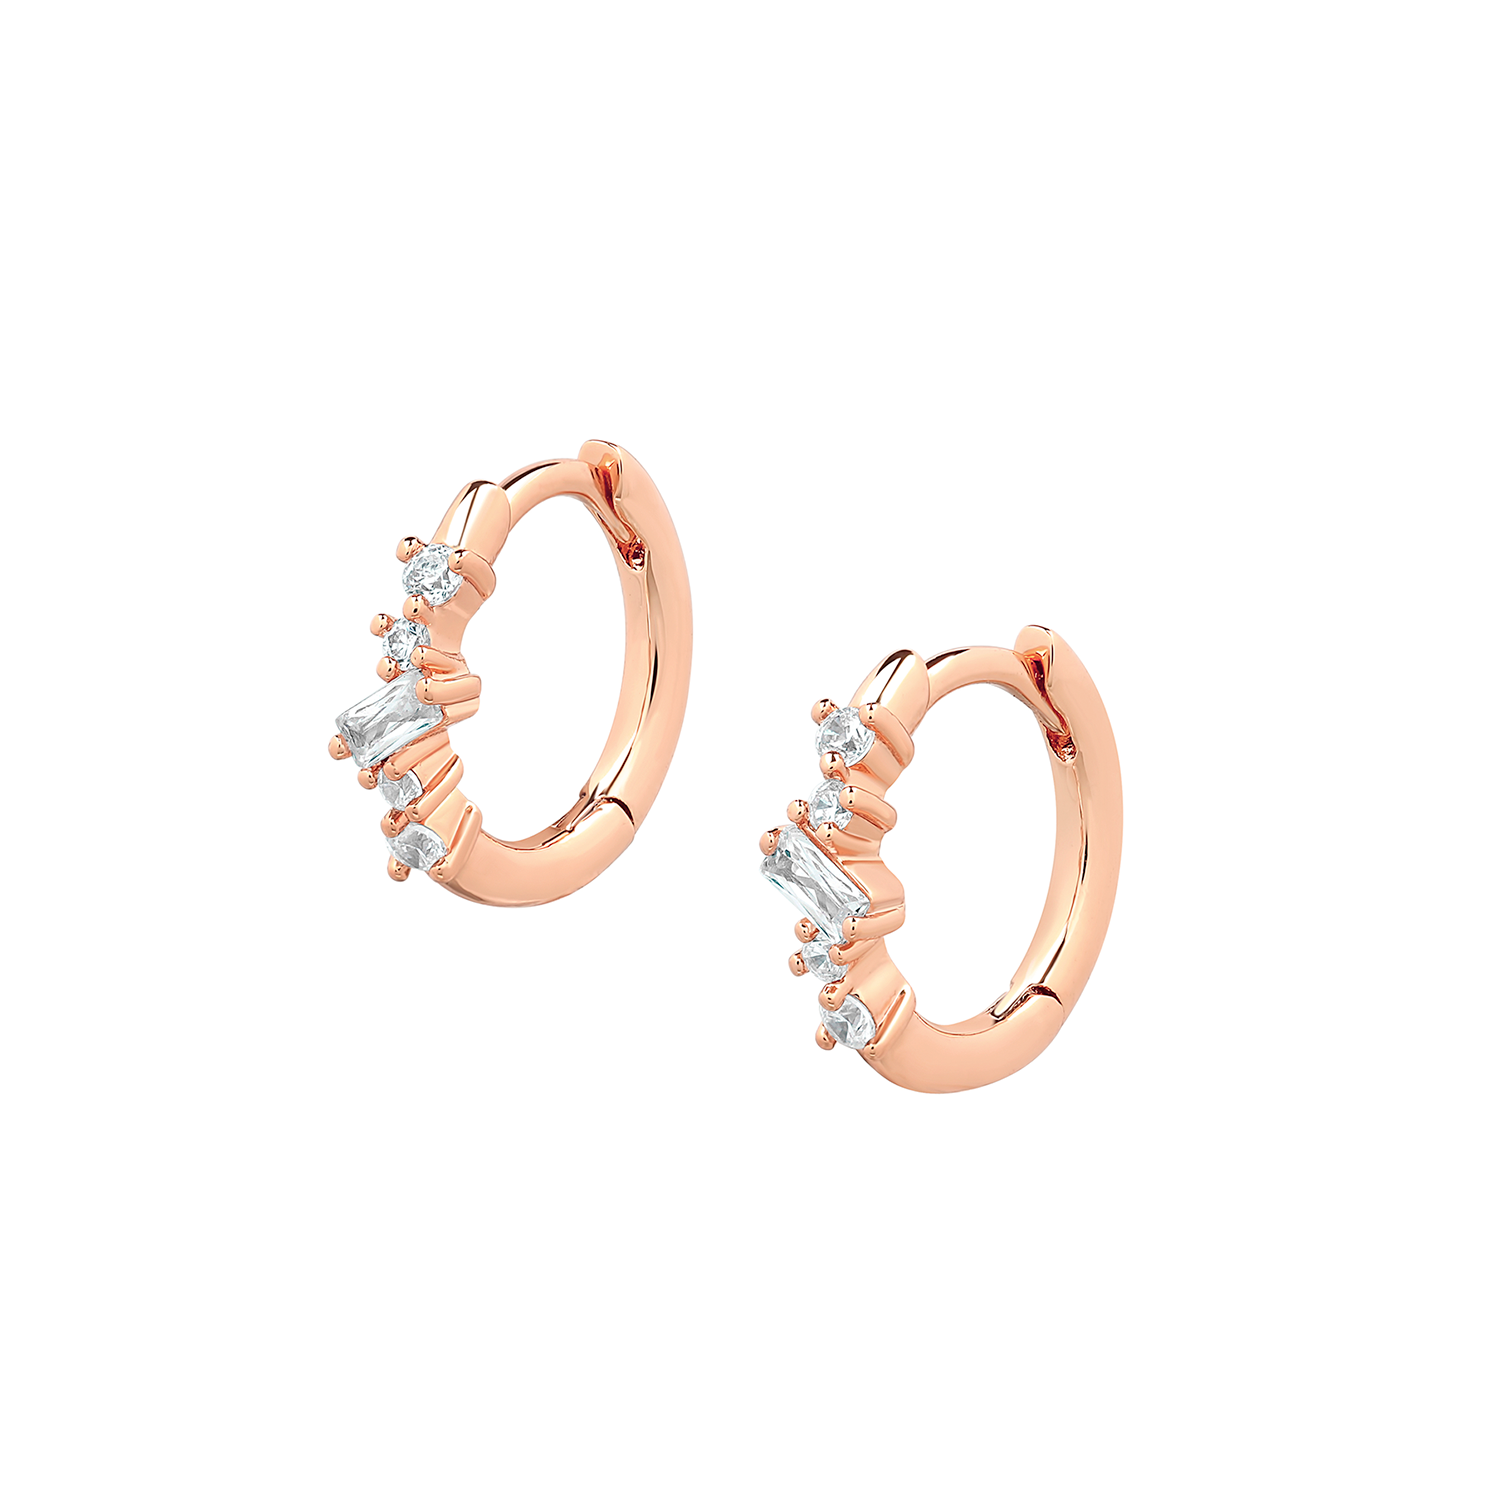 Elegant and statement earrings. Rose gold huggies set with cubic zirconia stones.